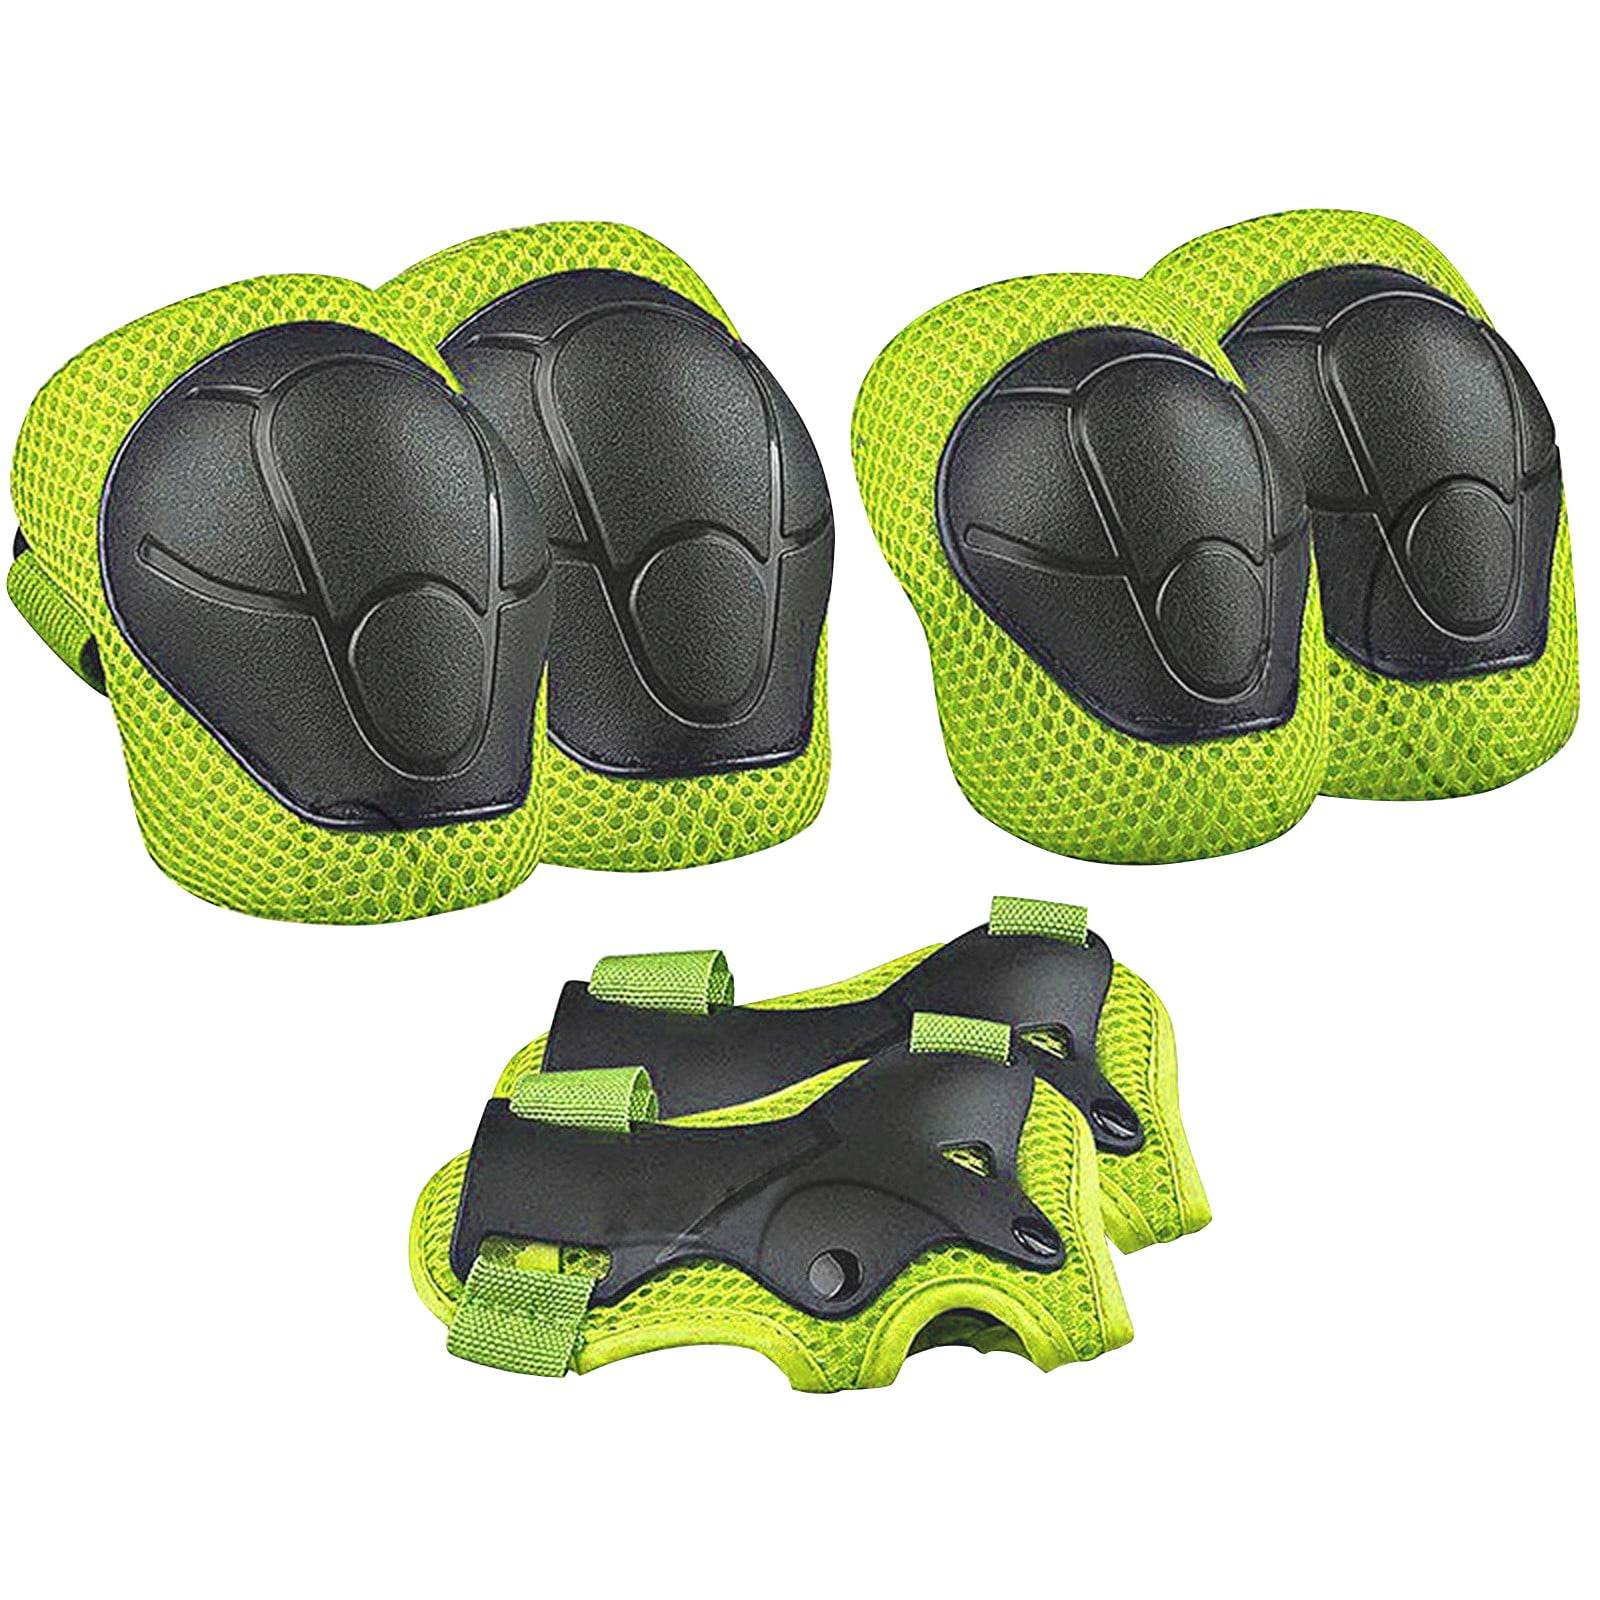 Details about   Figure Ice Skating Safety Knee Pads Guard Protective Gear Cover Accessories 